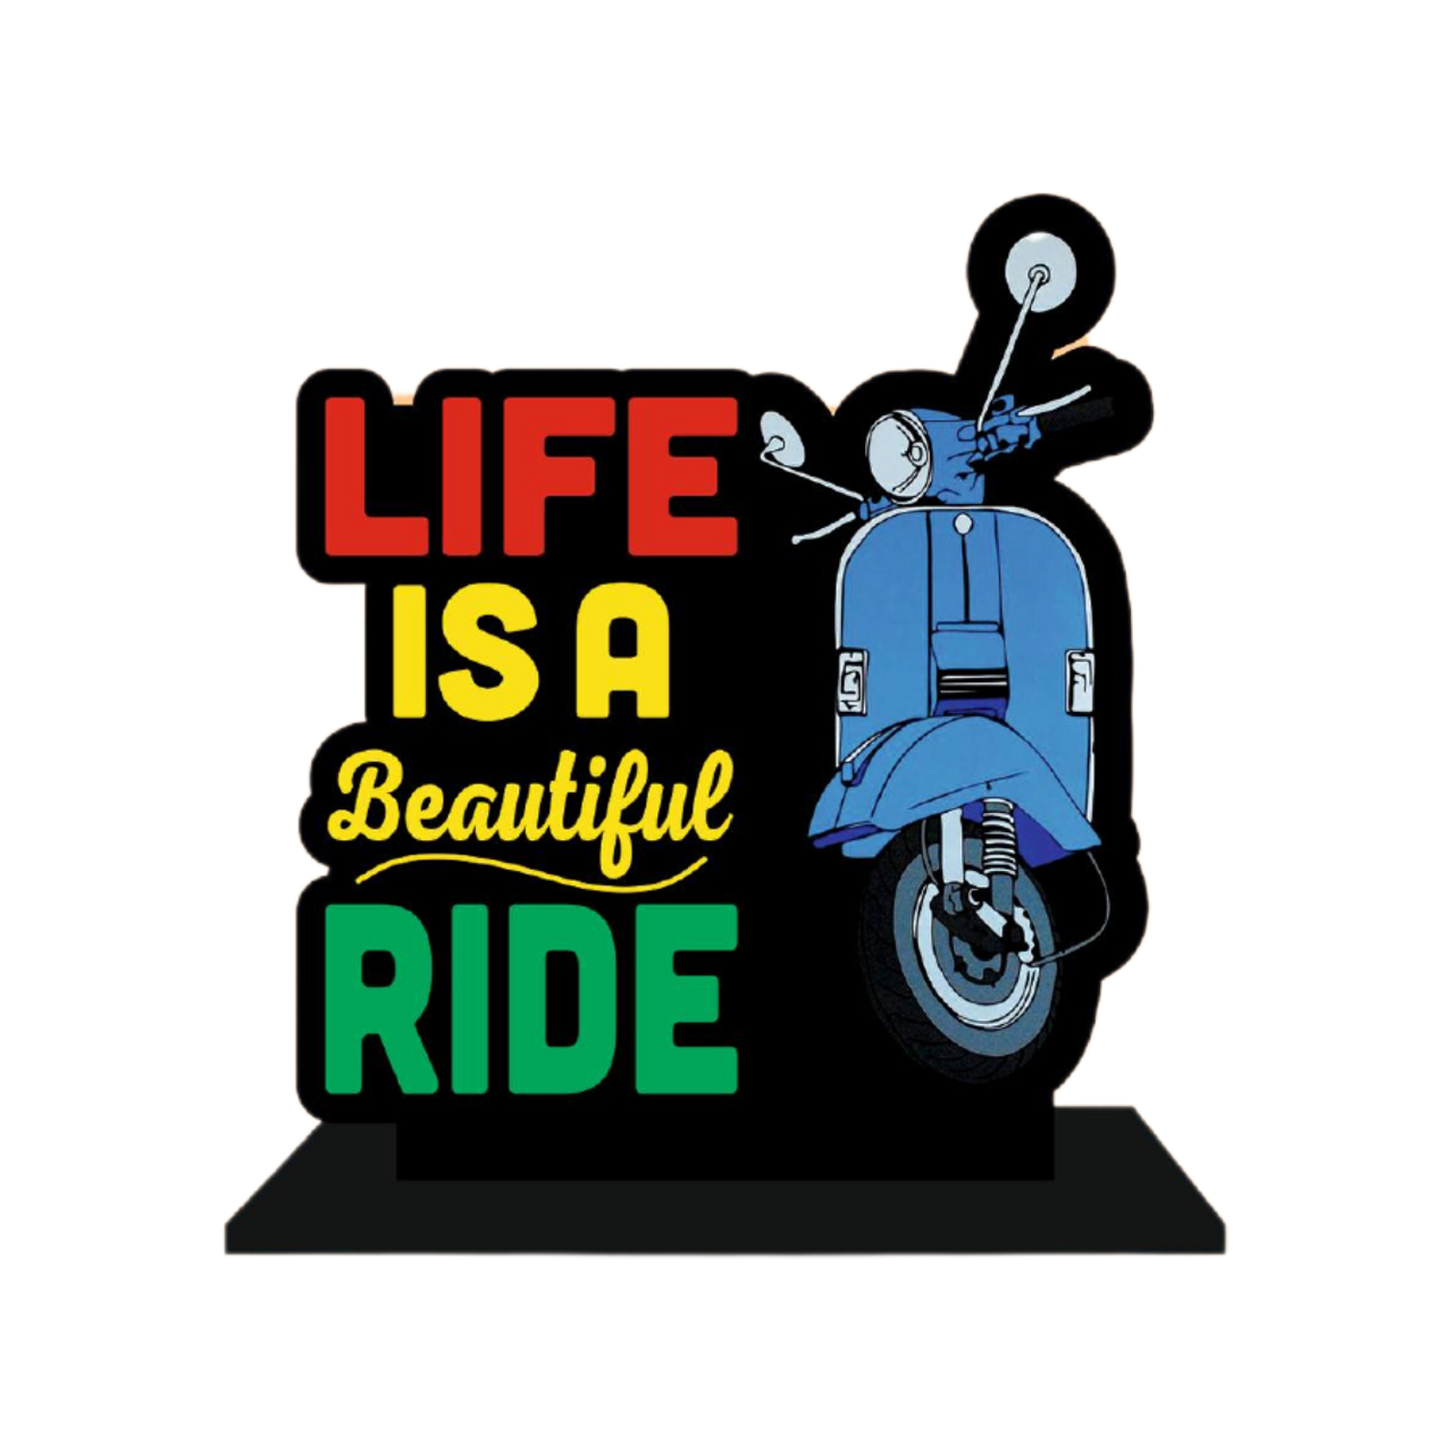 Motivational quote office desk frame | Life is a ride